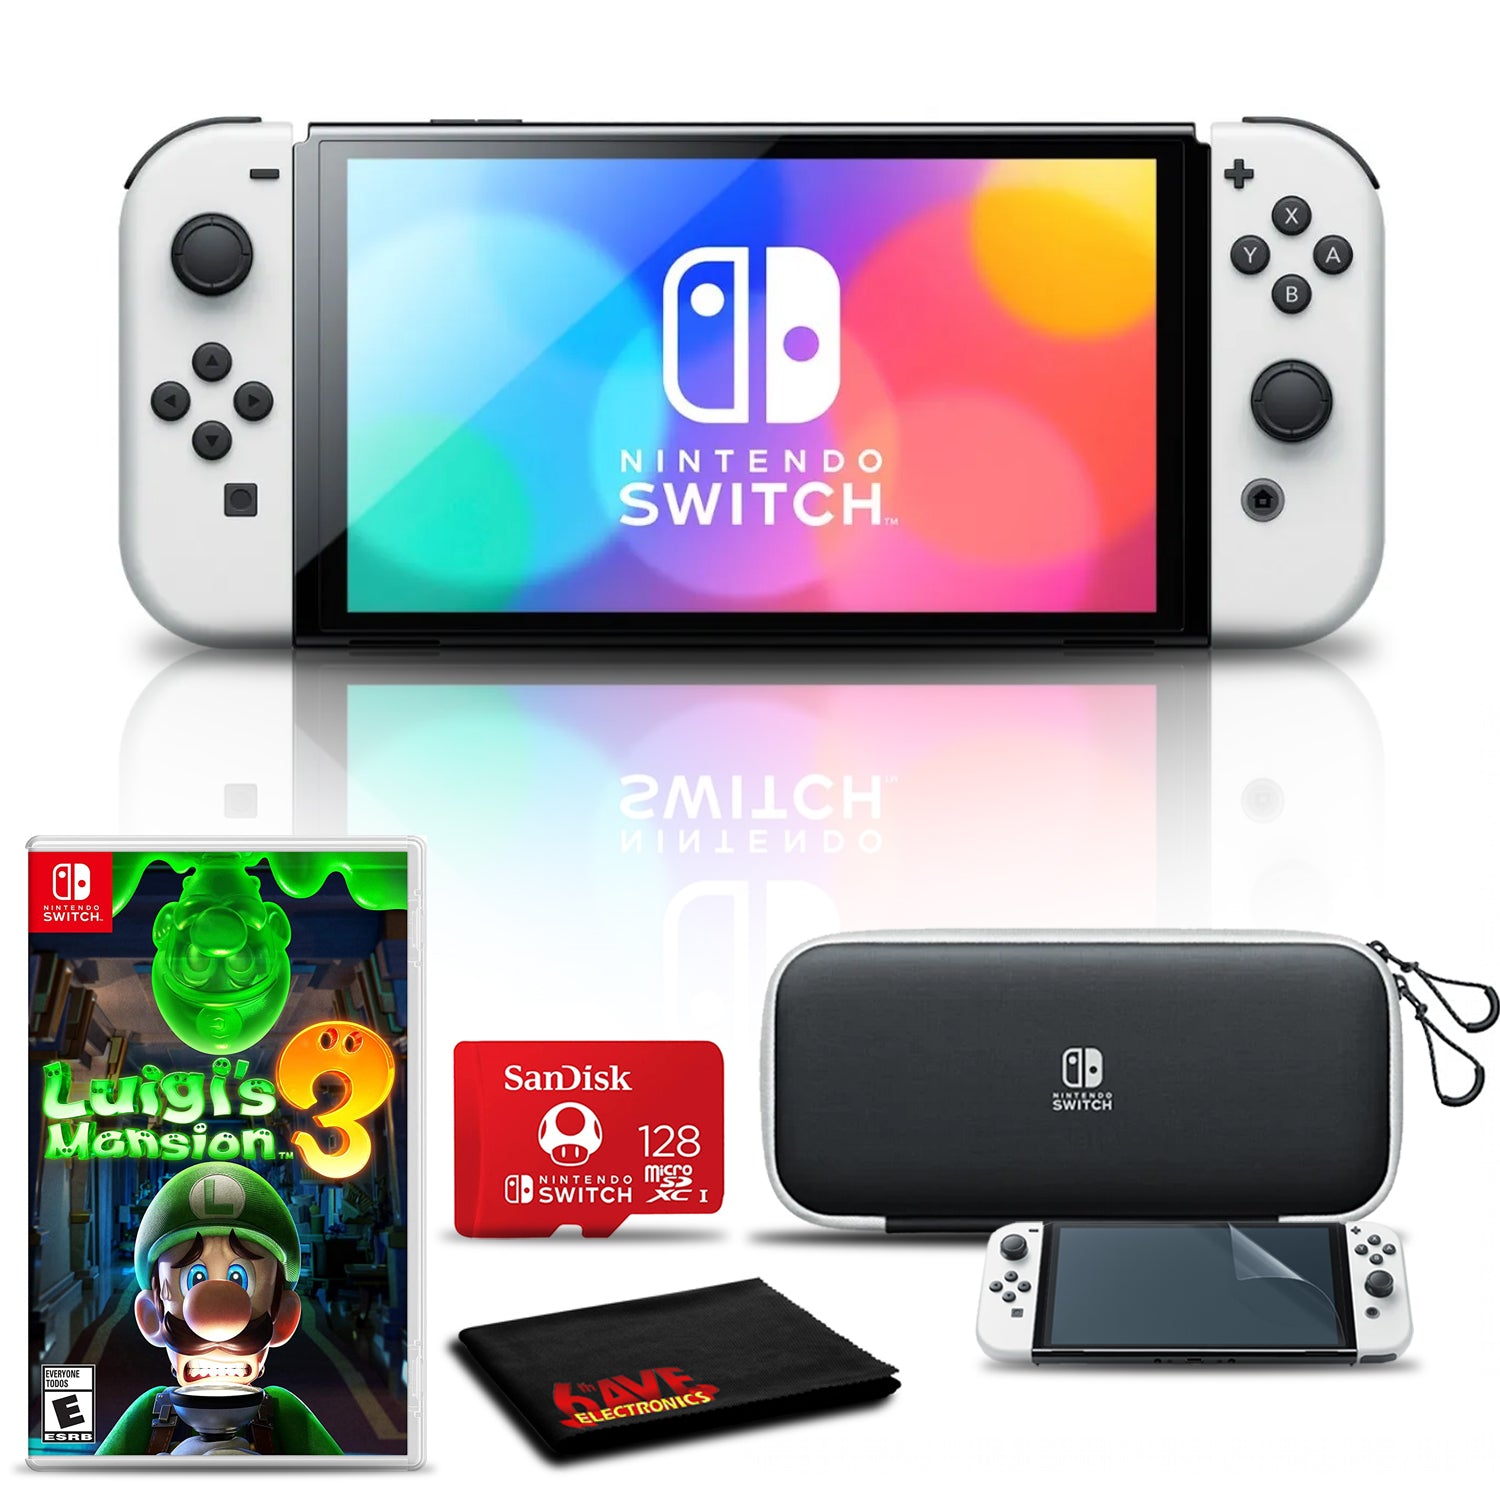 Nintendo Switch OLED White with Luigi's Mansion 3, 128GB Card, and More